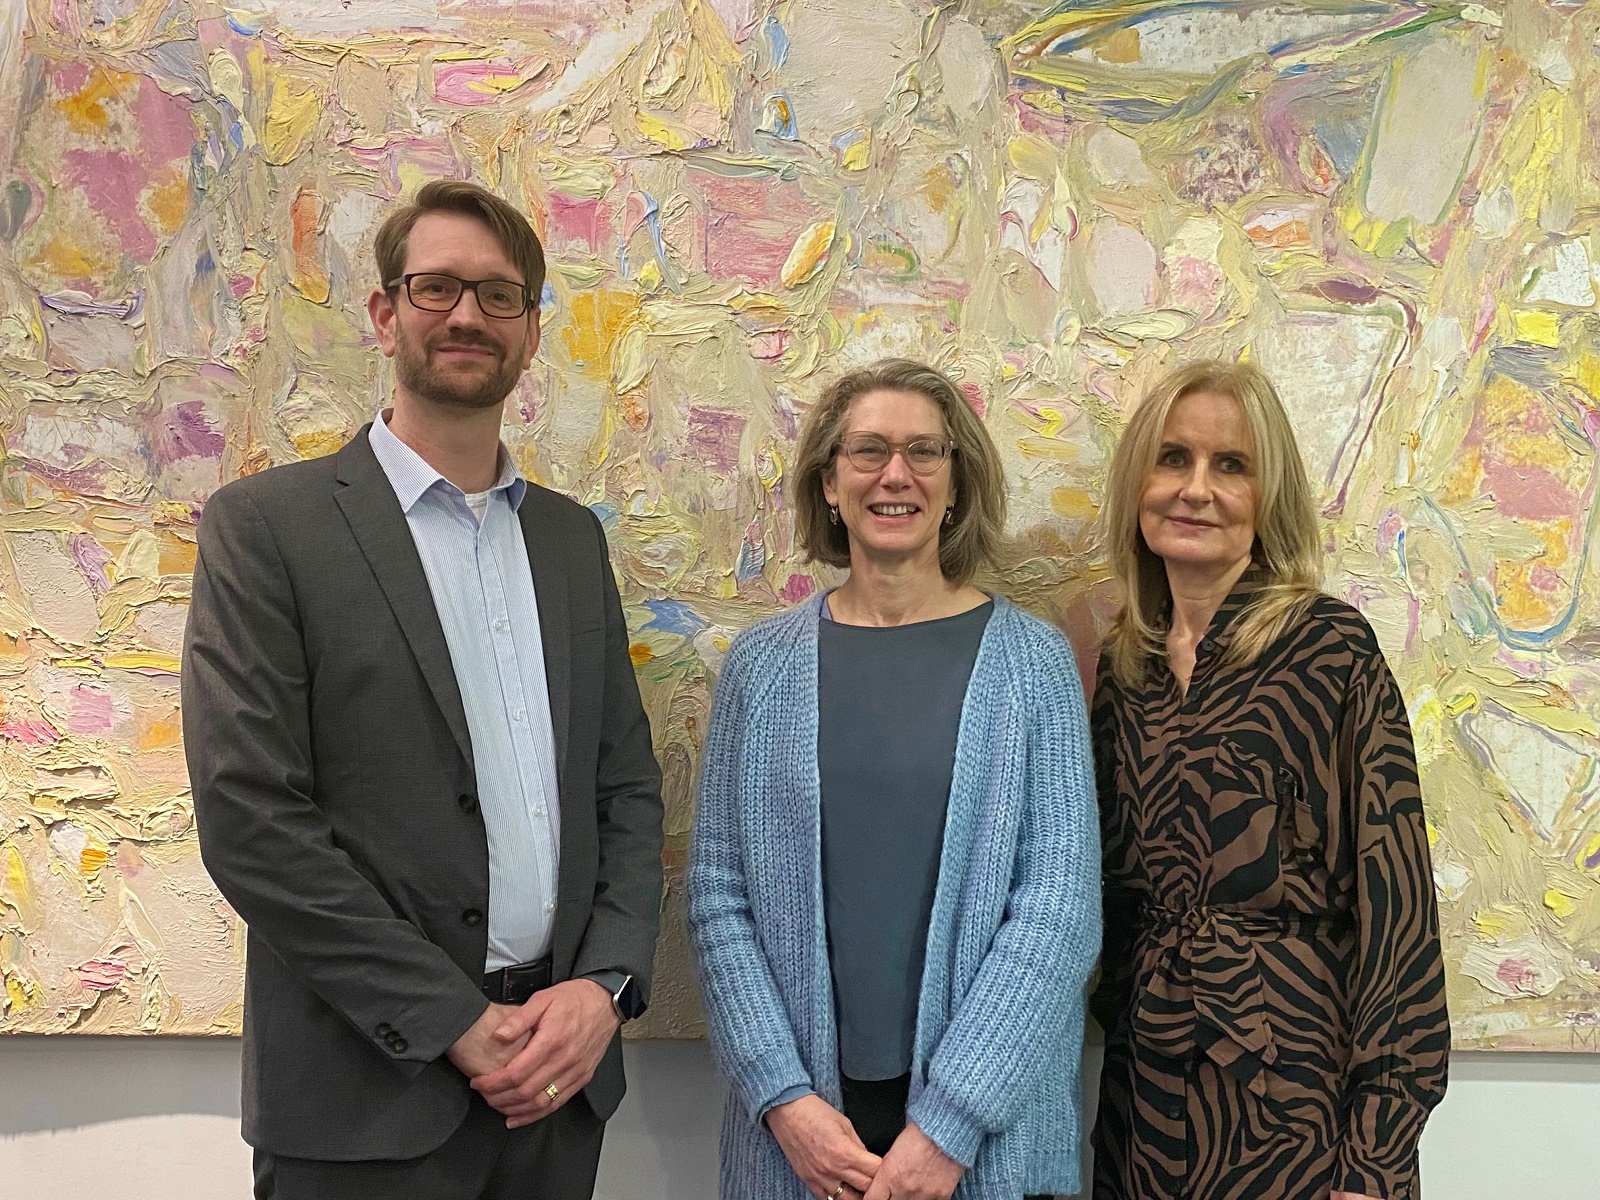 The cultural department of the Dutch Embassy in the UK, with Cultural Councellor Astrid de Vries in the middle, Policy Officer Koen Guiking on the left and Support Officer Trudy Barnes on the right.